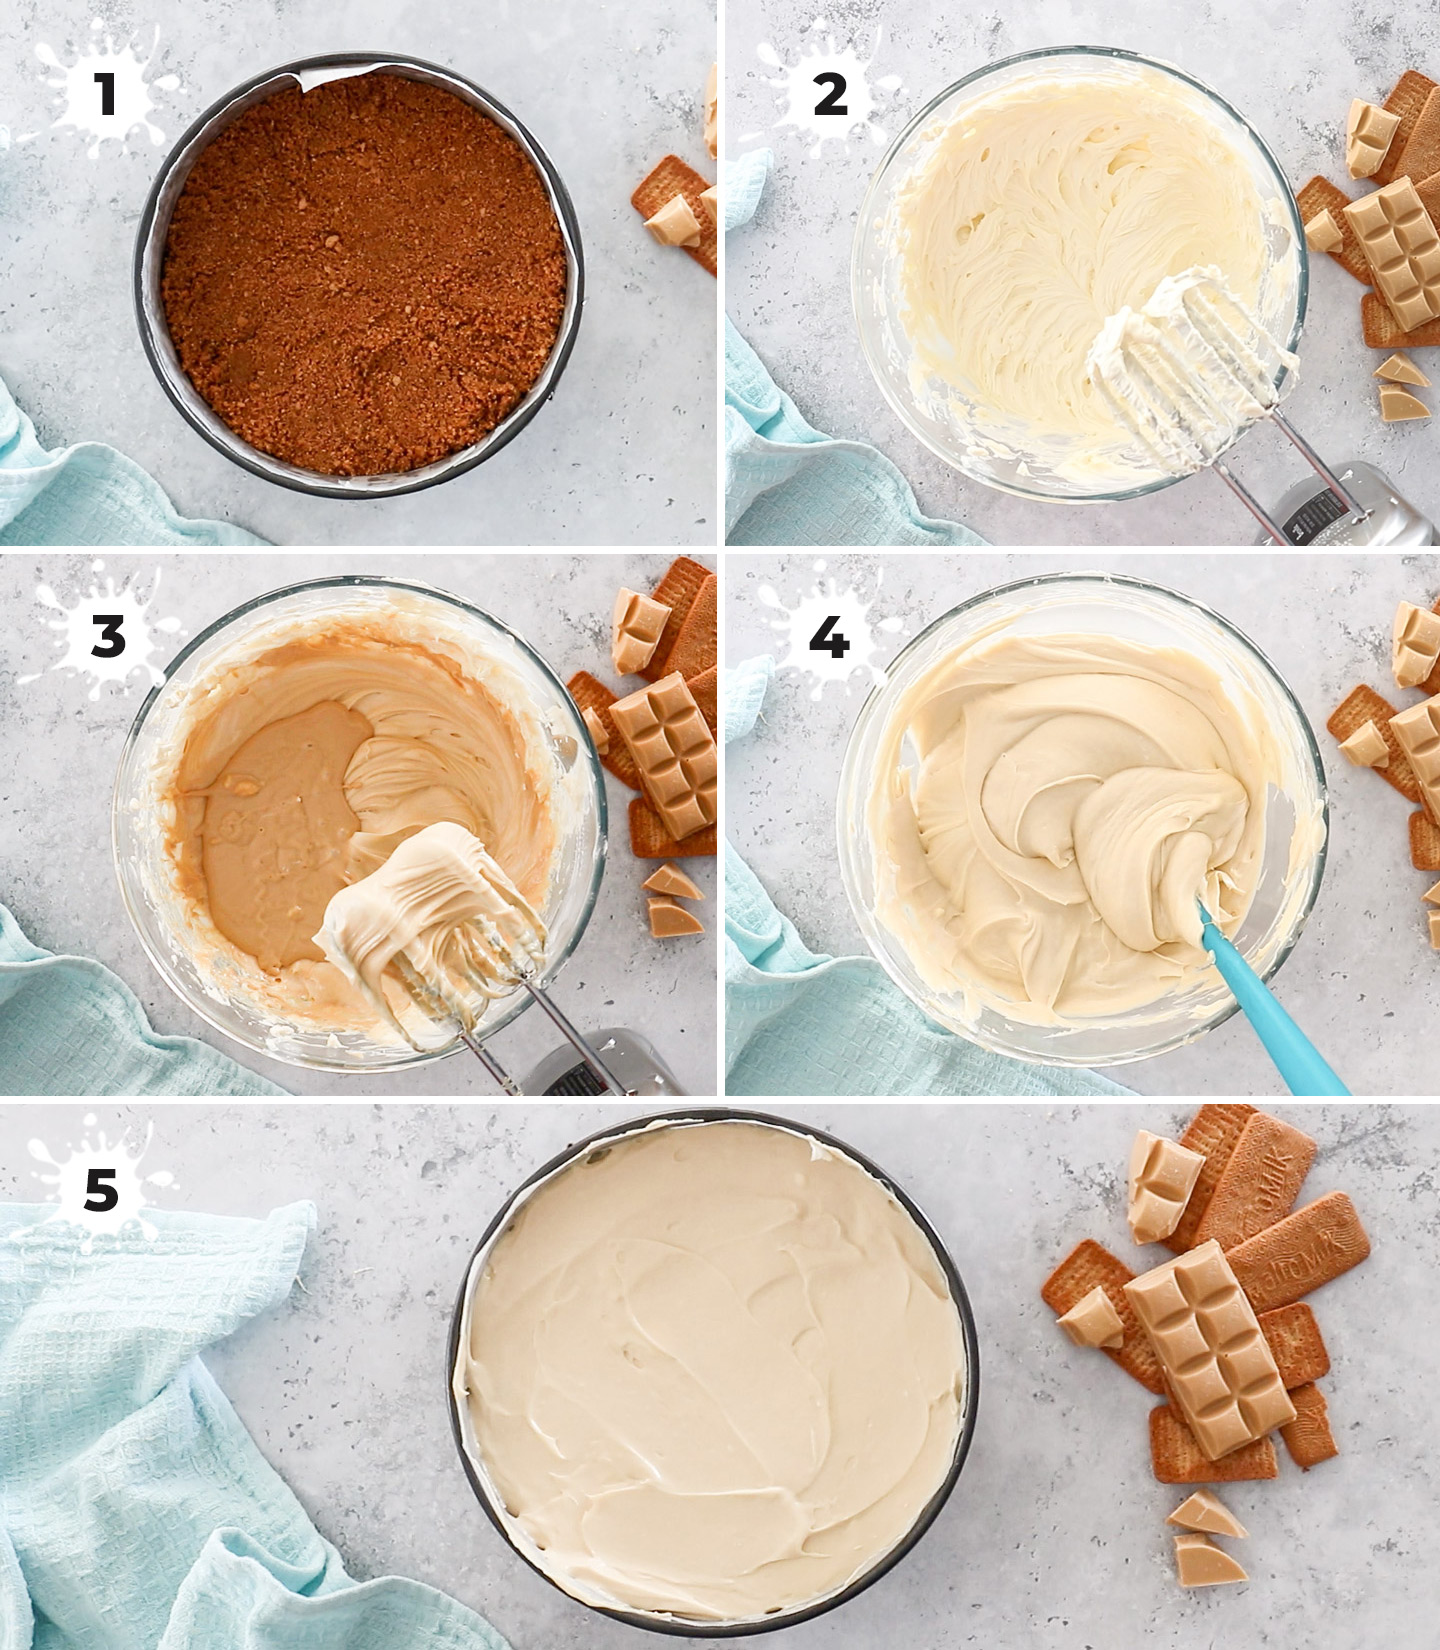 A collage showing how to make Caramilk cheesecake.